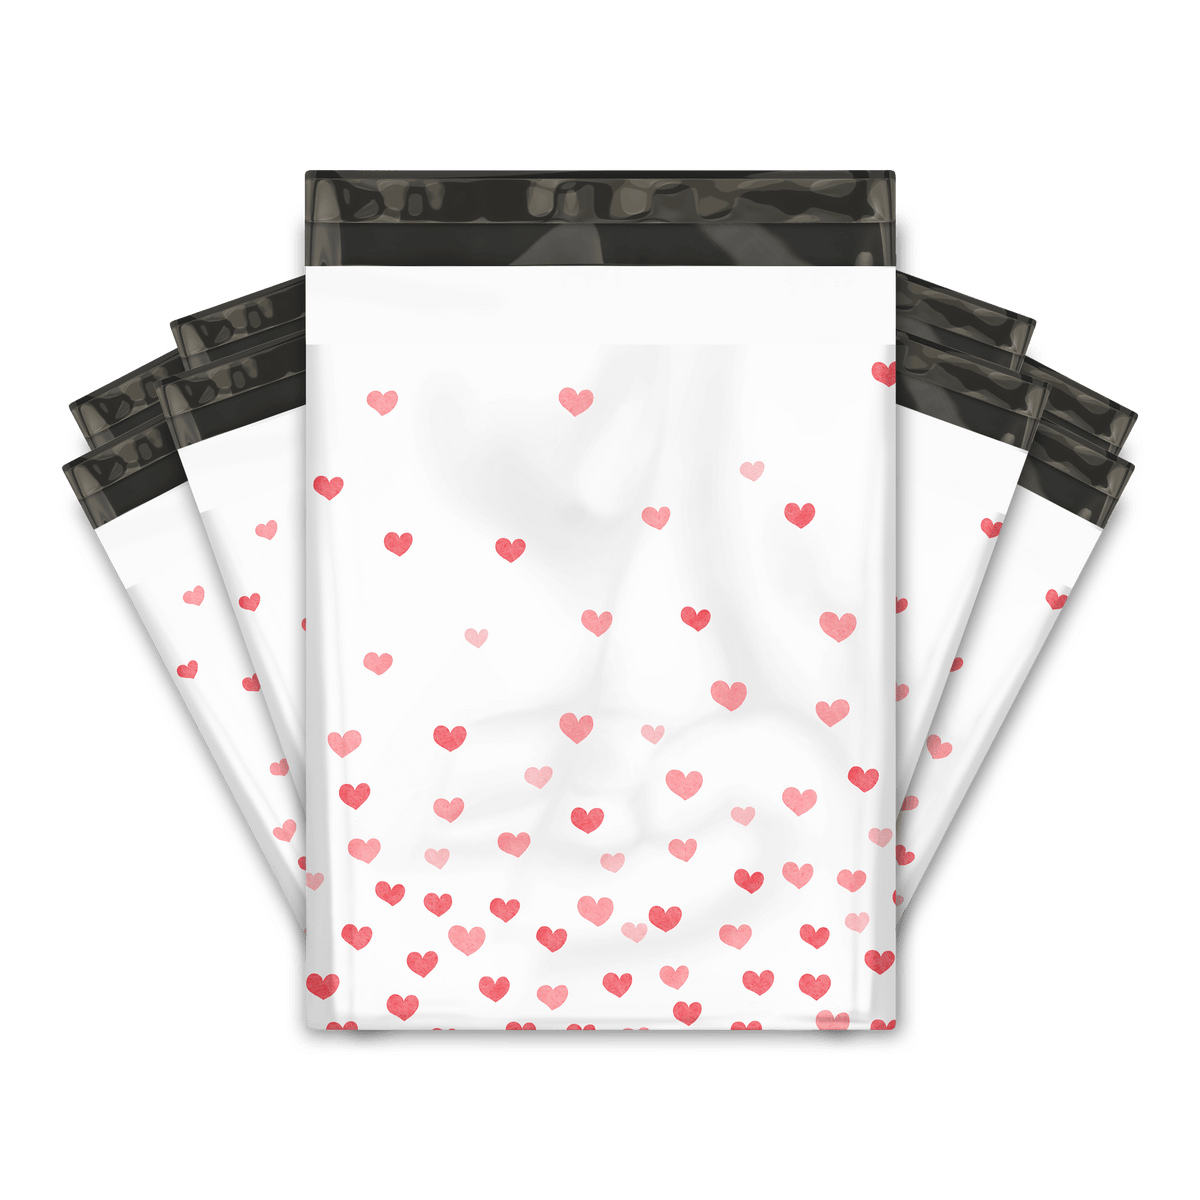  Fading Hearts Designer Poly Mailers Shipping Envelopes Premium Printed Bags